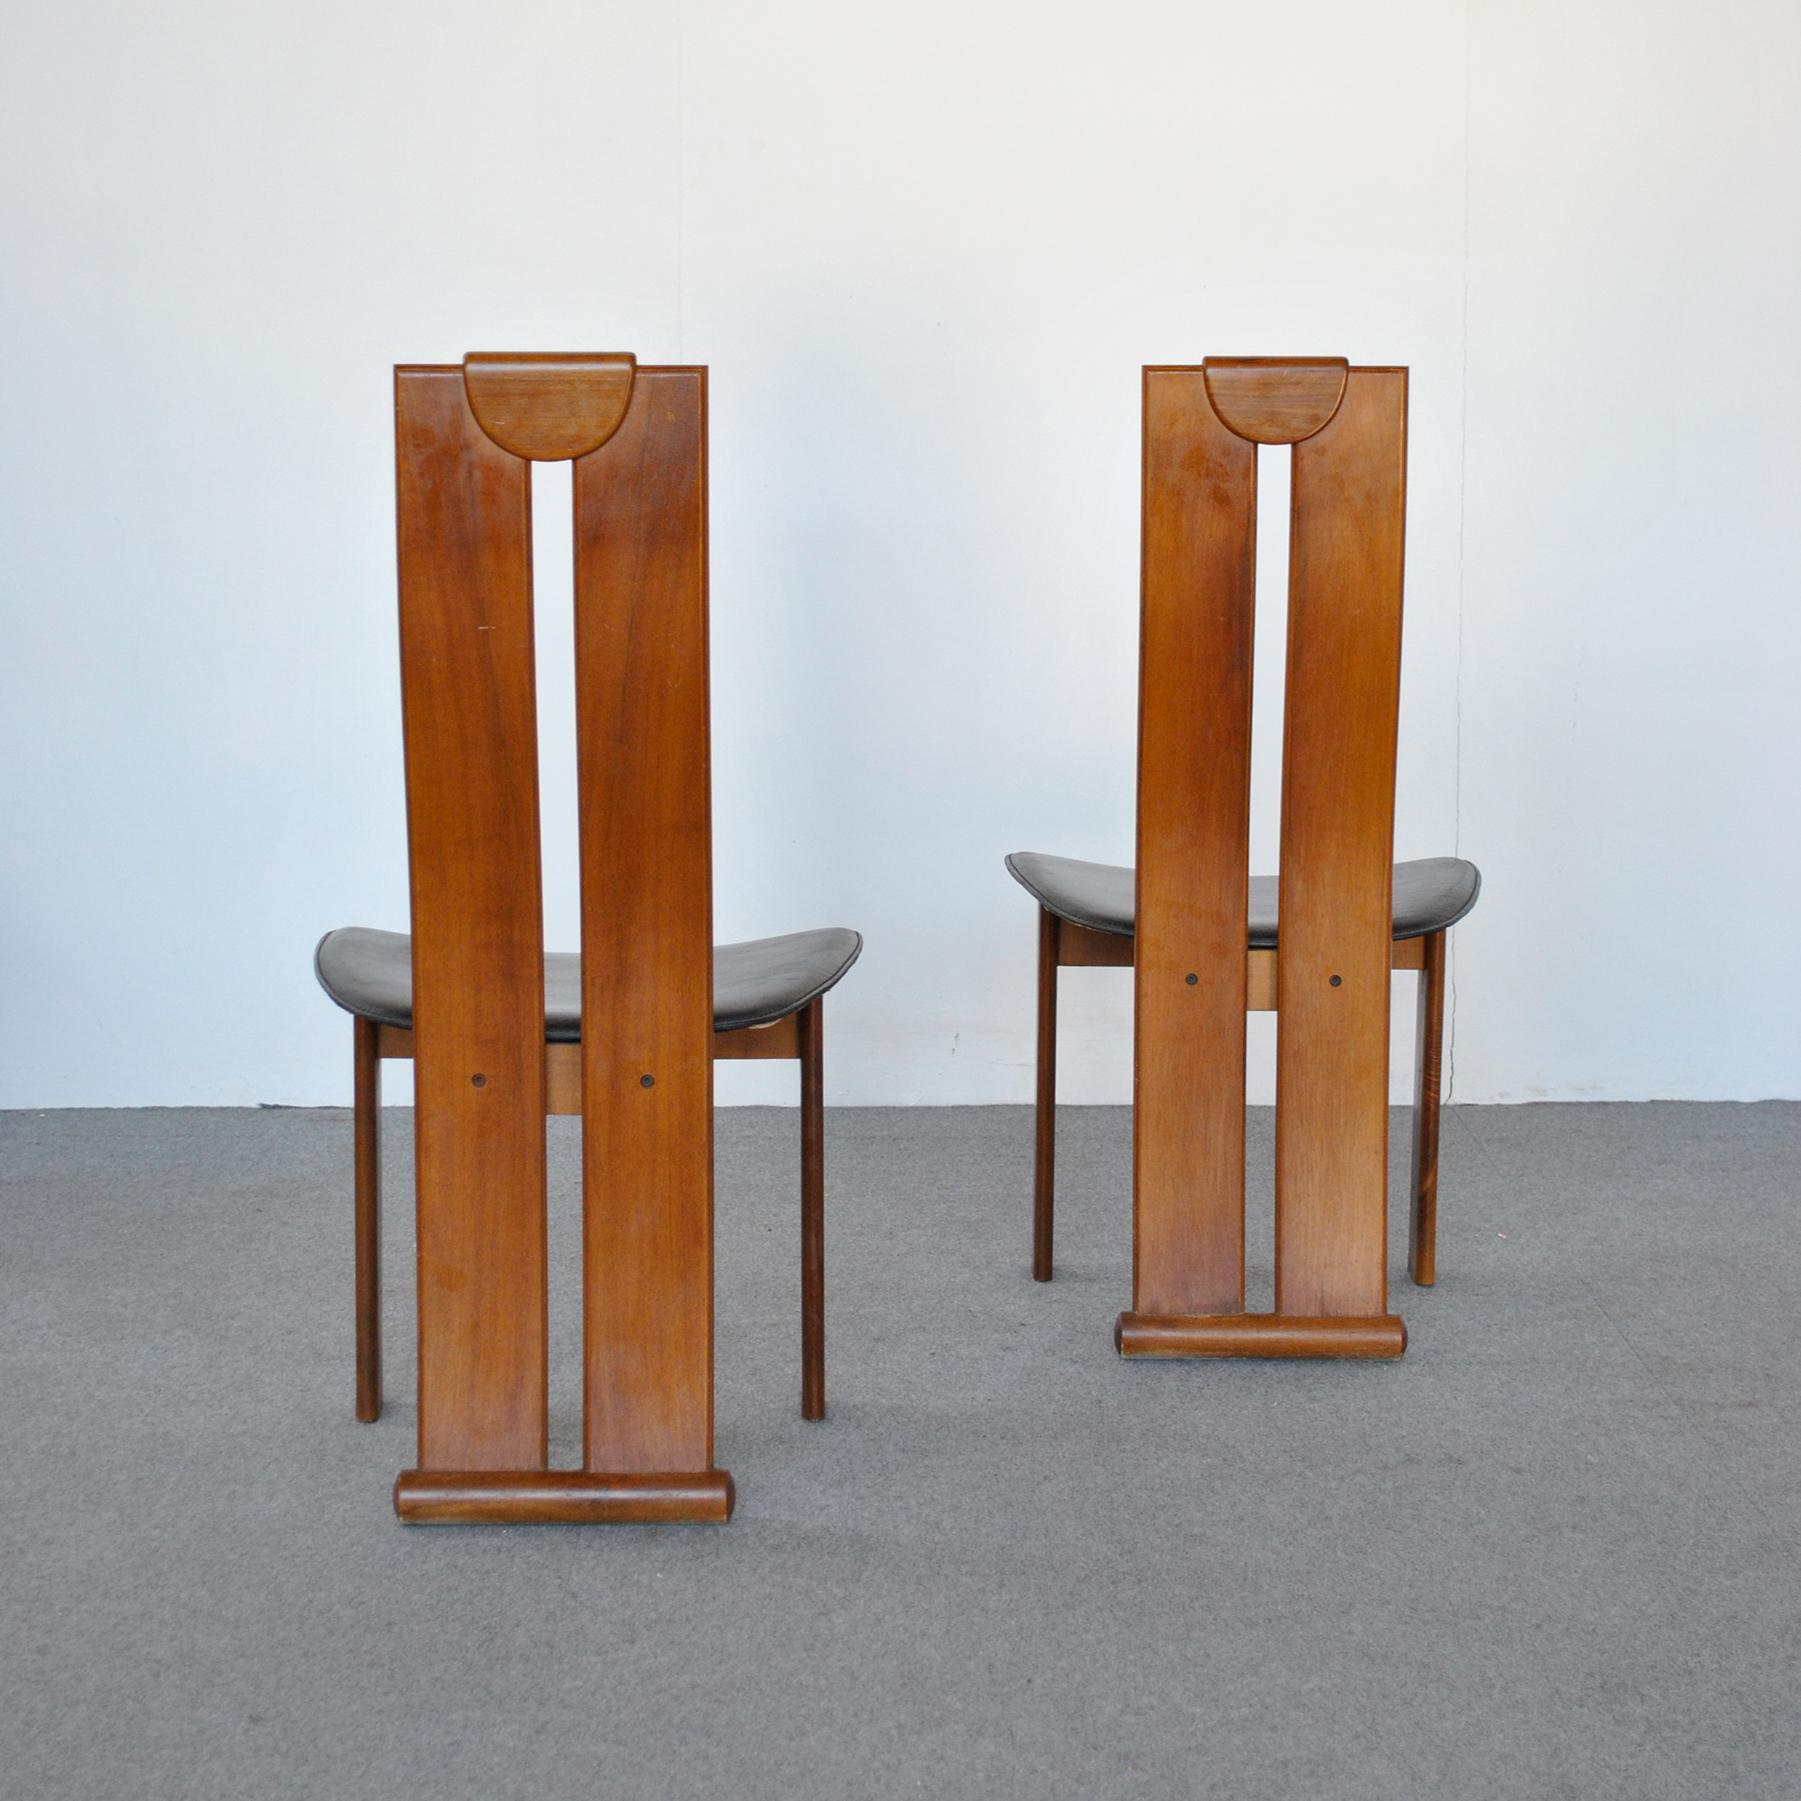 Afra & Tobia Scarpa in the Manner Set of Four Chairs 1